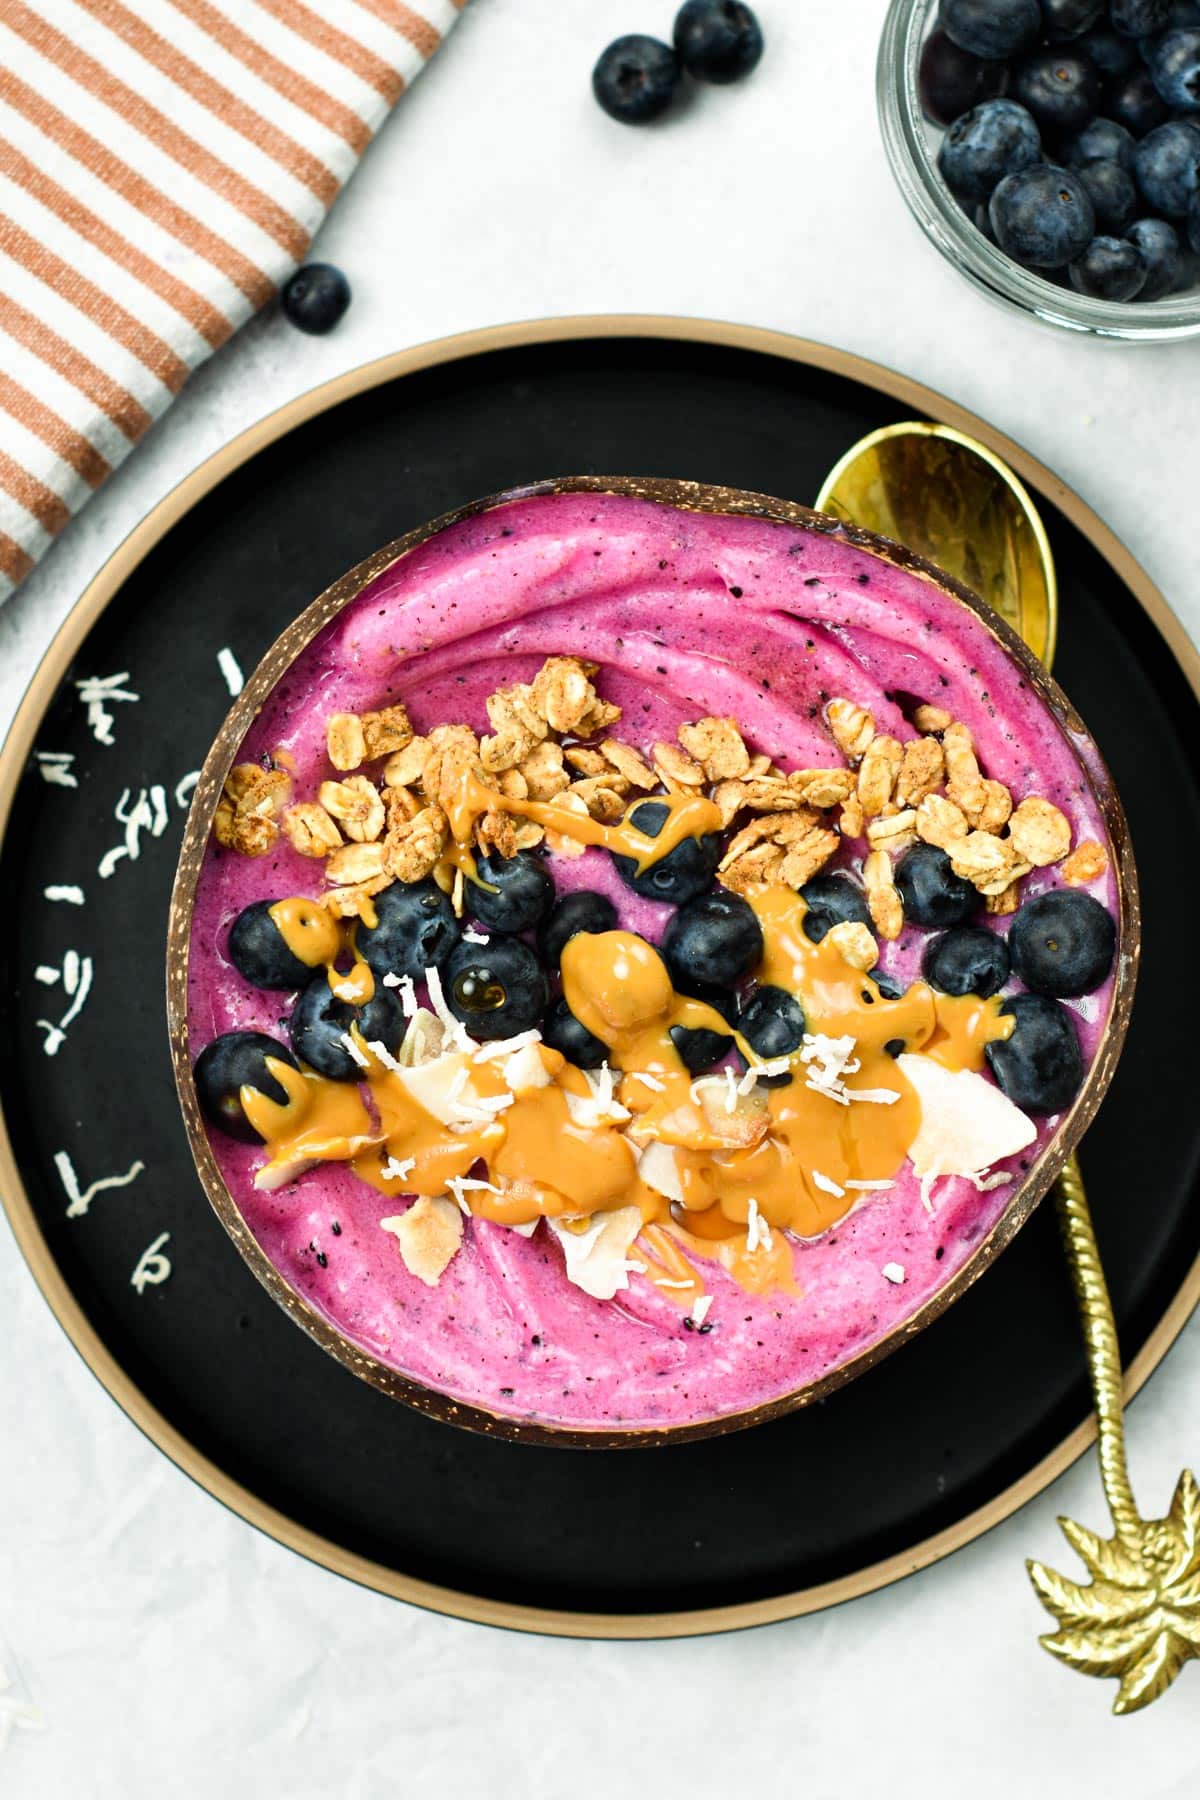 This Pitaya bowl is the most delicious frothy smoothie bowl to starts the day with vitamin C and feel energize all day. Plus, this dragon fruit bowl takes barely 5 minutes to make and require only 3 ingredients so even the kids can make this alone.This Pitaya bowl is the most delicious frothy smoothie bowl to starts the day with vitamin C and feel energize all day. Plus, this dragon fruit bowl takes barely 5 minutes to make and require only 3 ingredients so even the kids can make this alone.